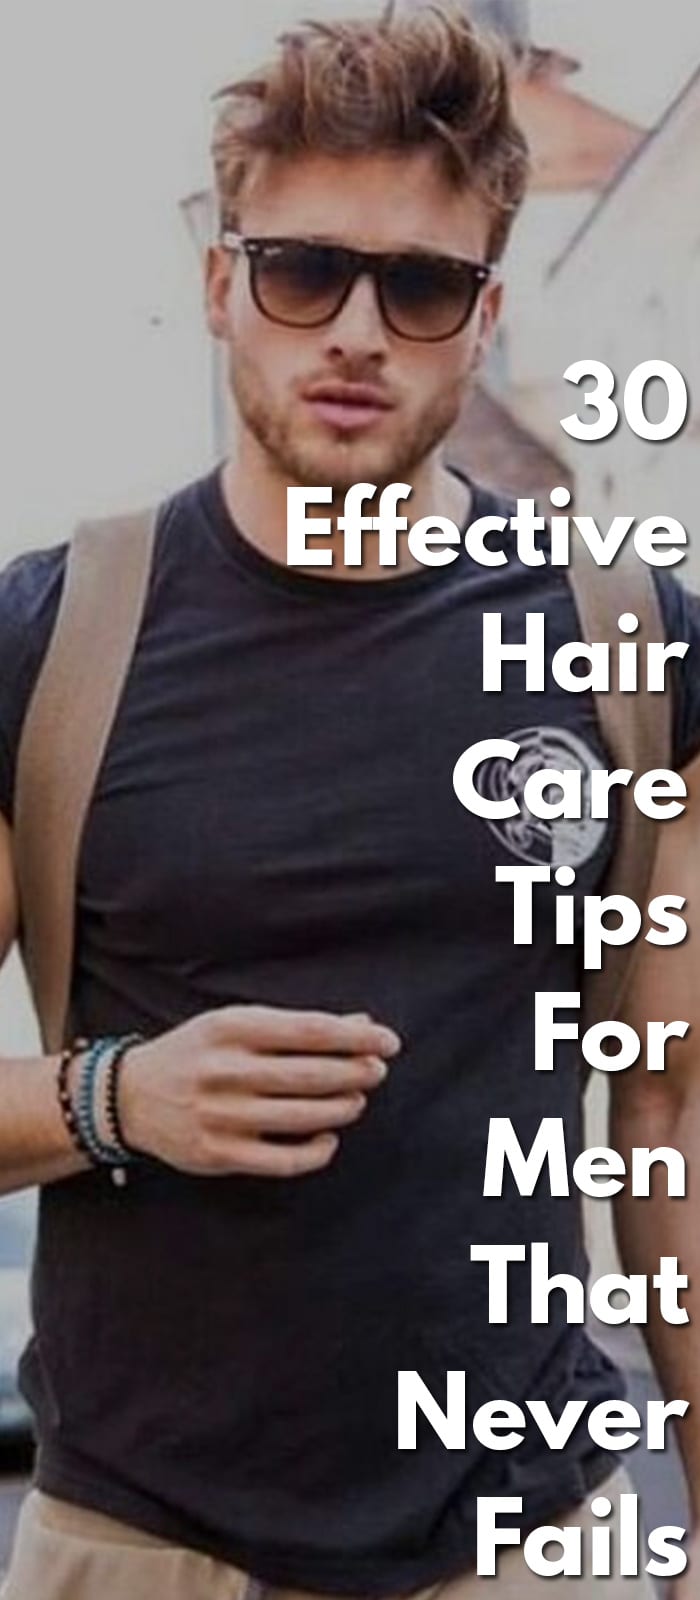 30-Effective-Hair-Care-Tips-For-Men-That-Never-Fails.